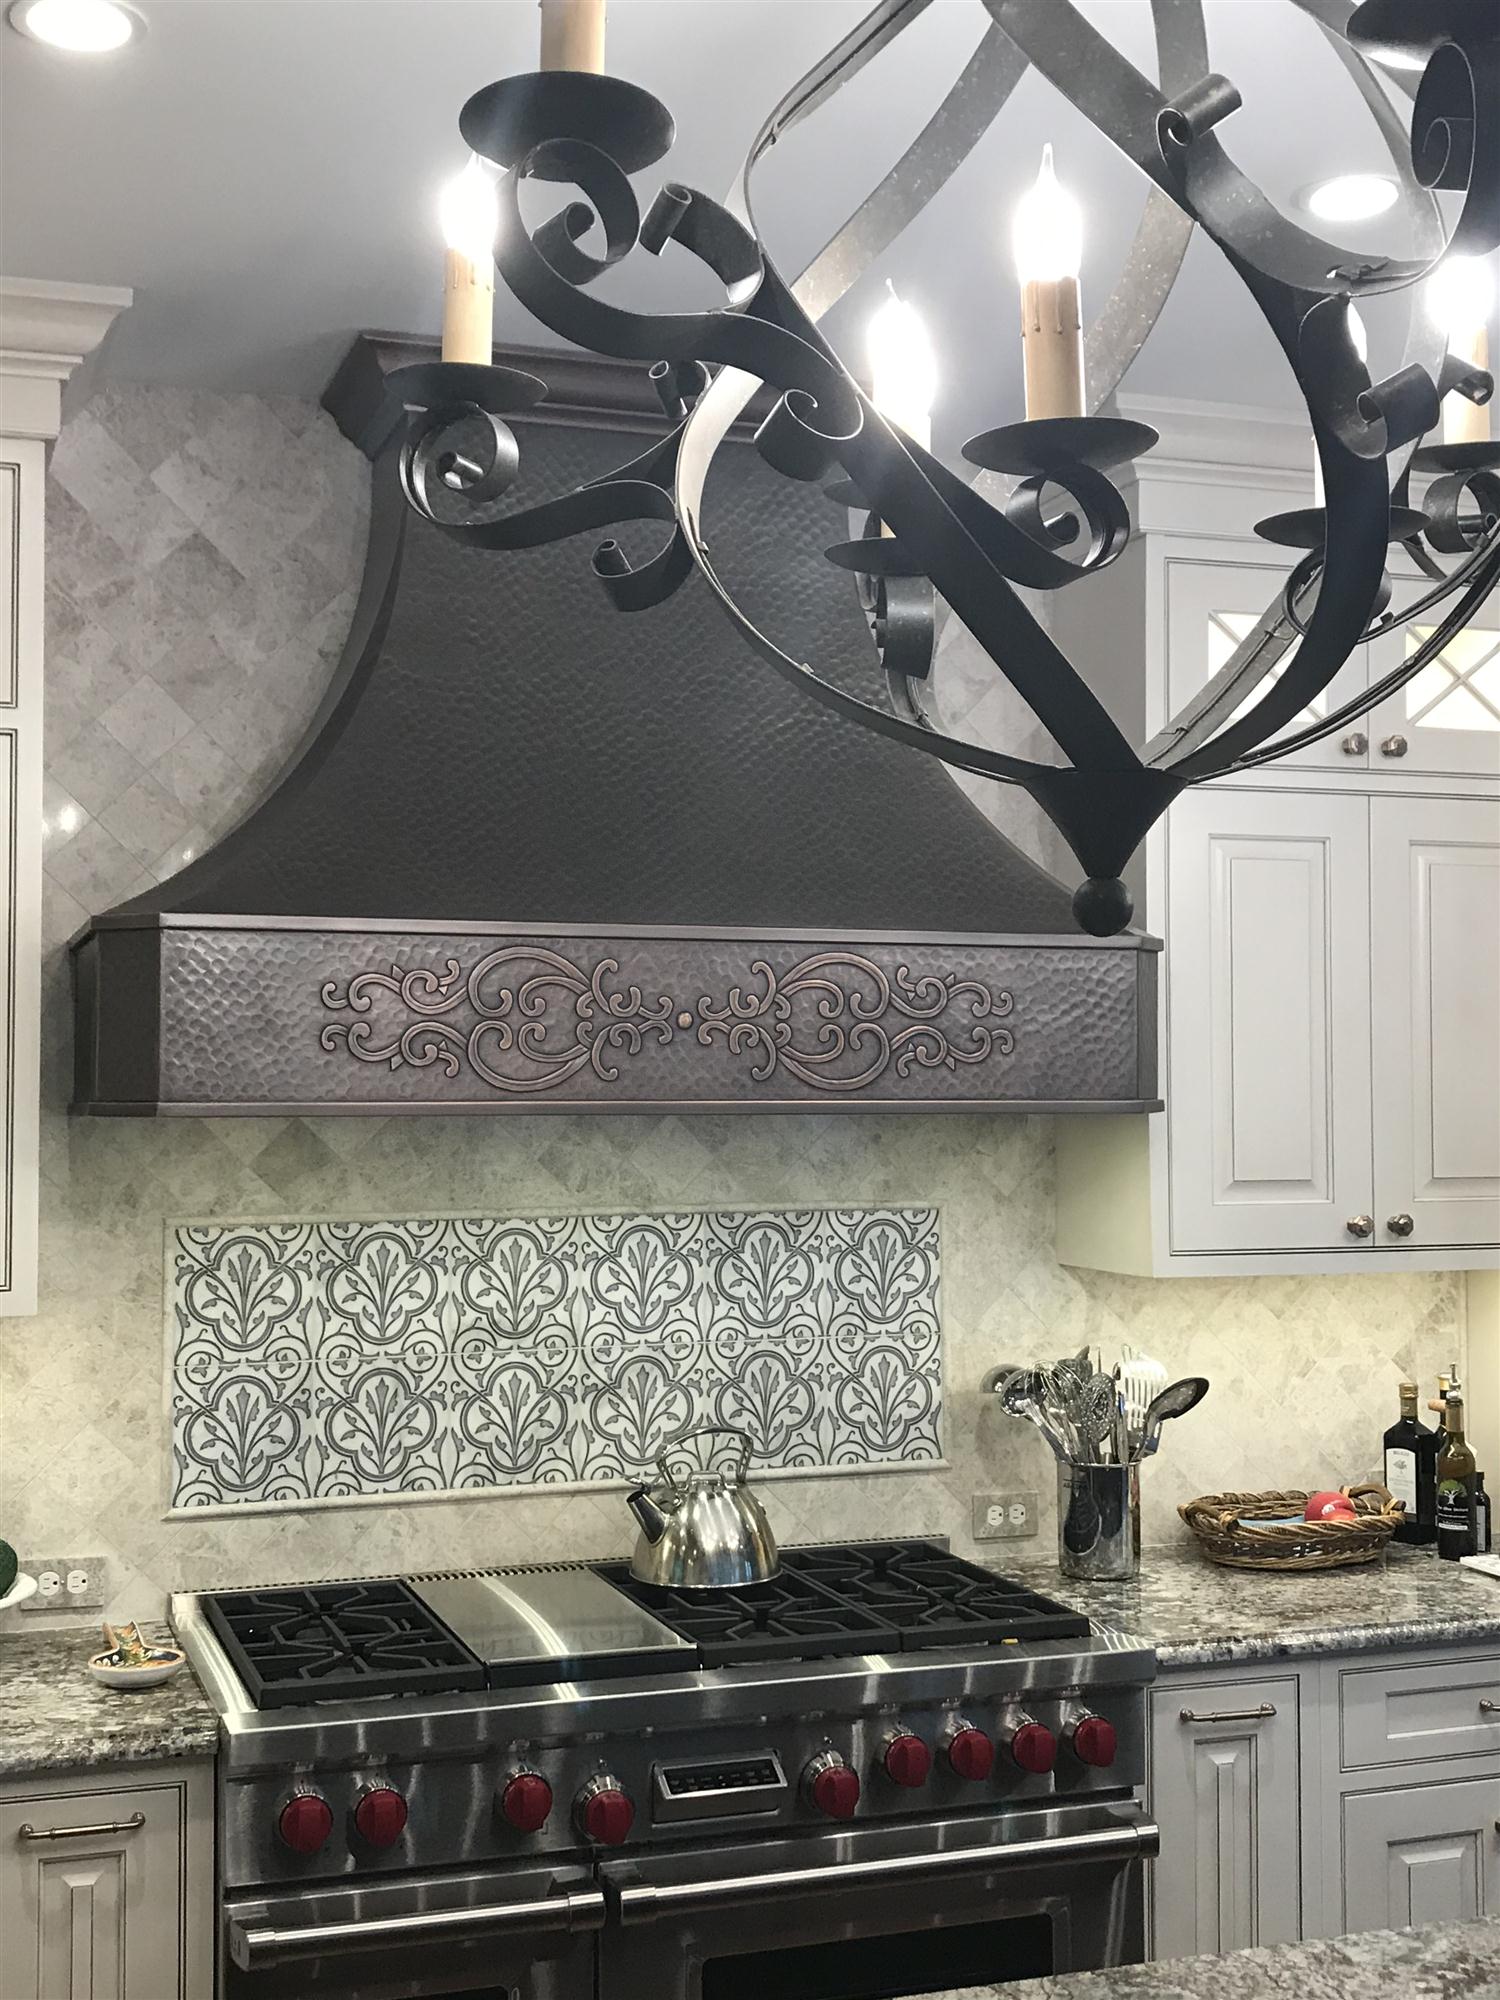 Traditional hammered copper vent hood makes kitchen beautiful